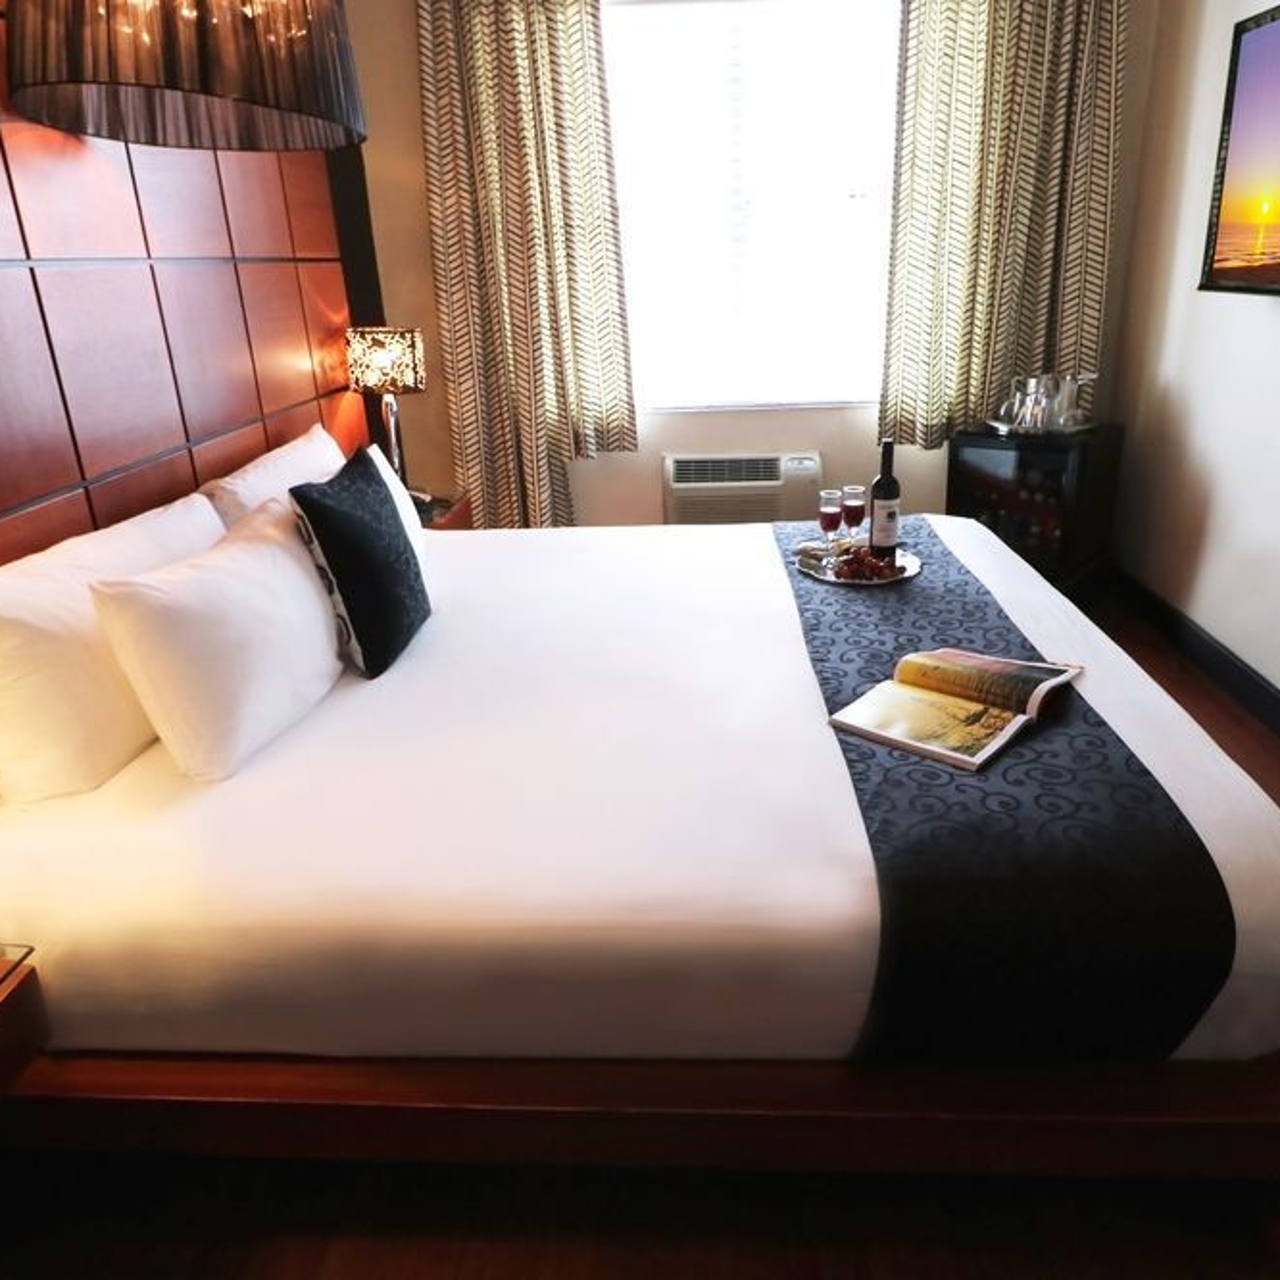 a South Beach Group Hotel Chesterfield Hotel & Suites - 3 HRS star ...